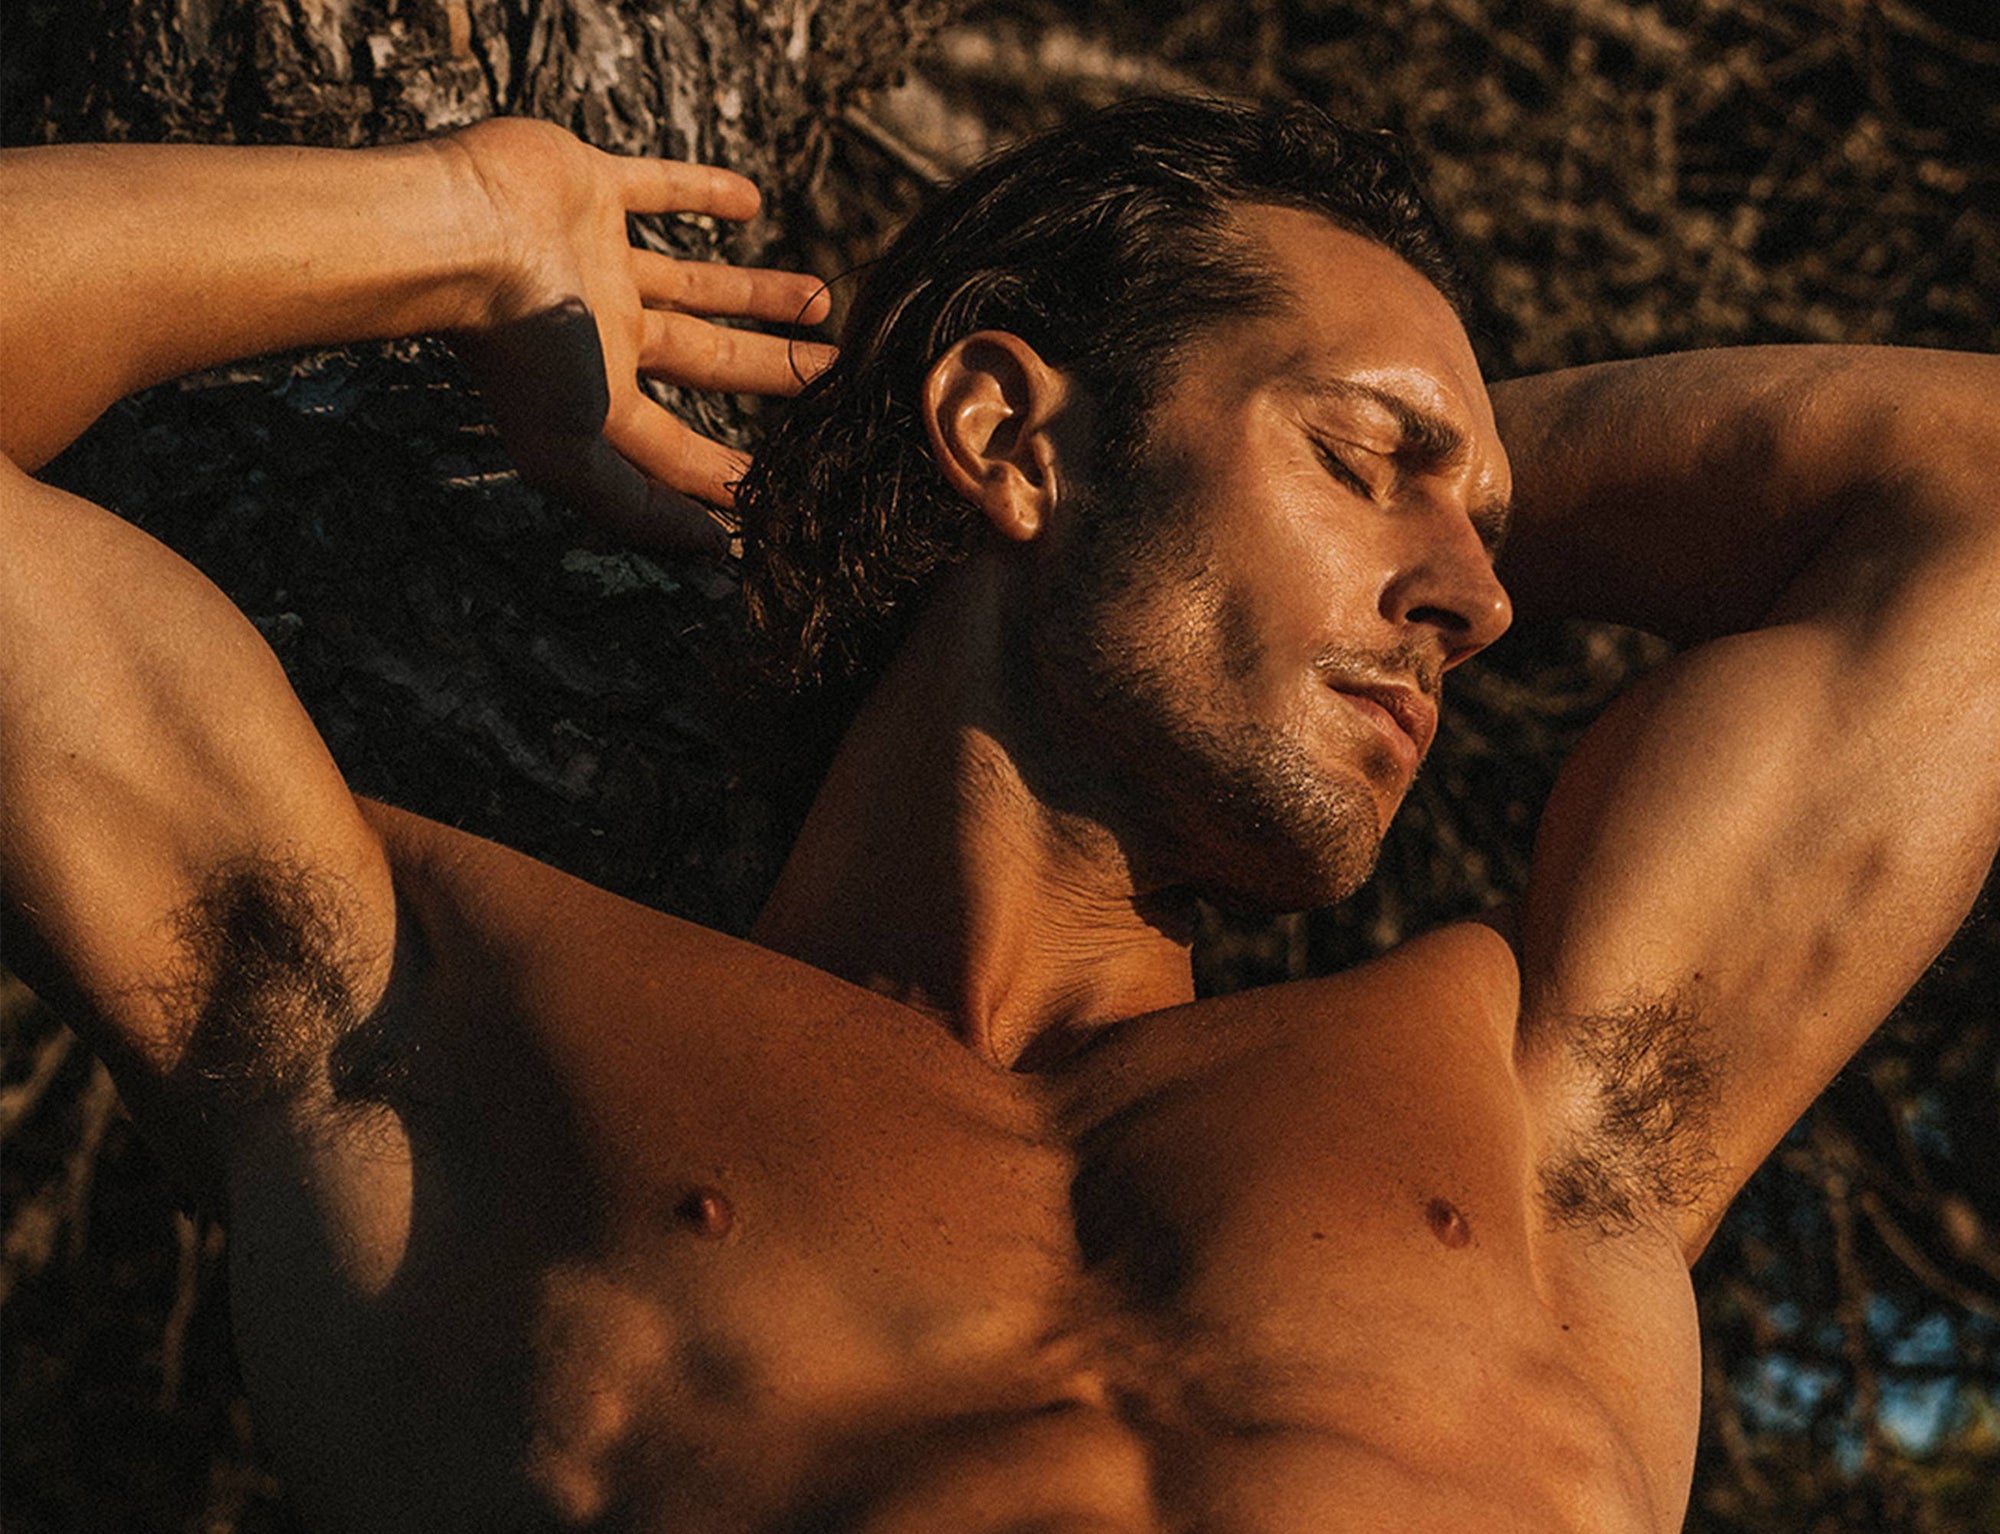 Raphael Valentin, model and personal trainer, chats with Yummy about his roots in France and upbringing in the United States, his career path, and his interests and wild experiences.